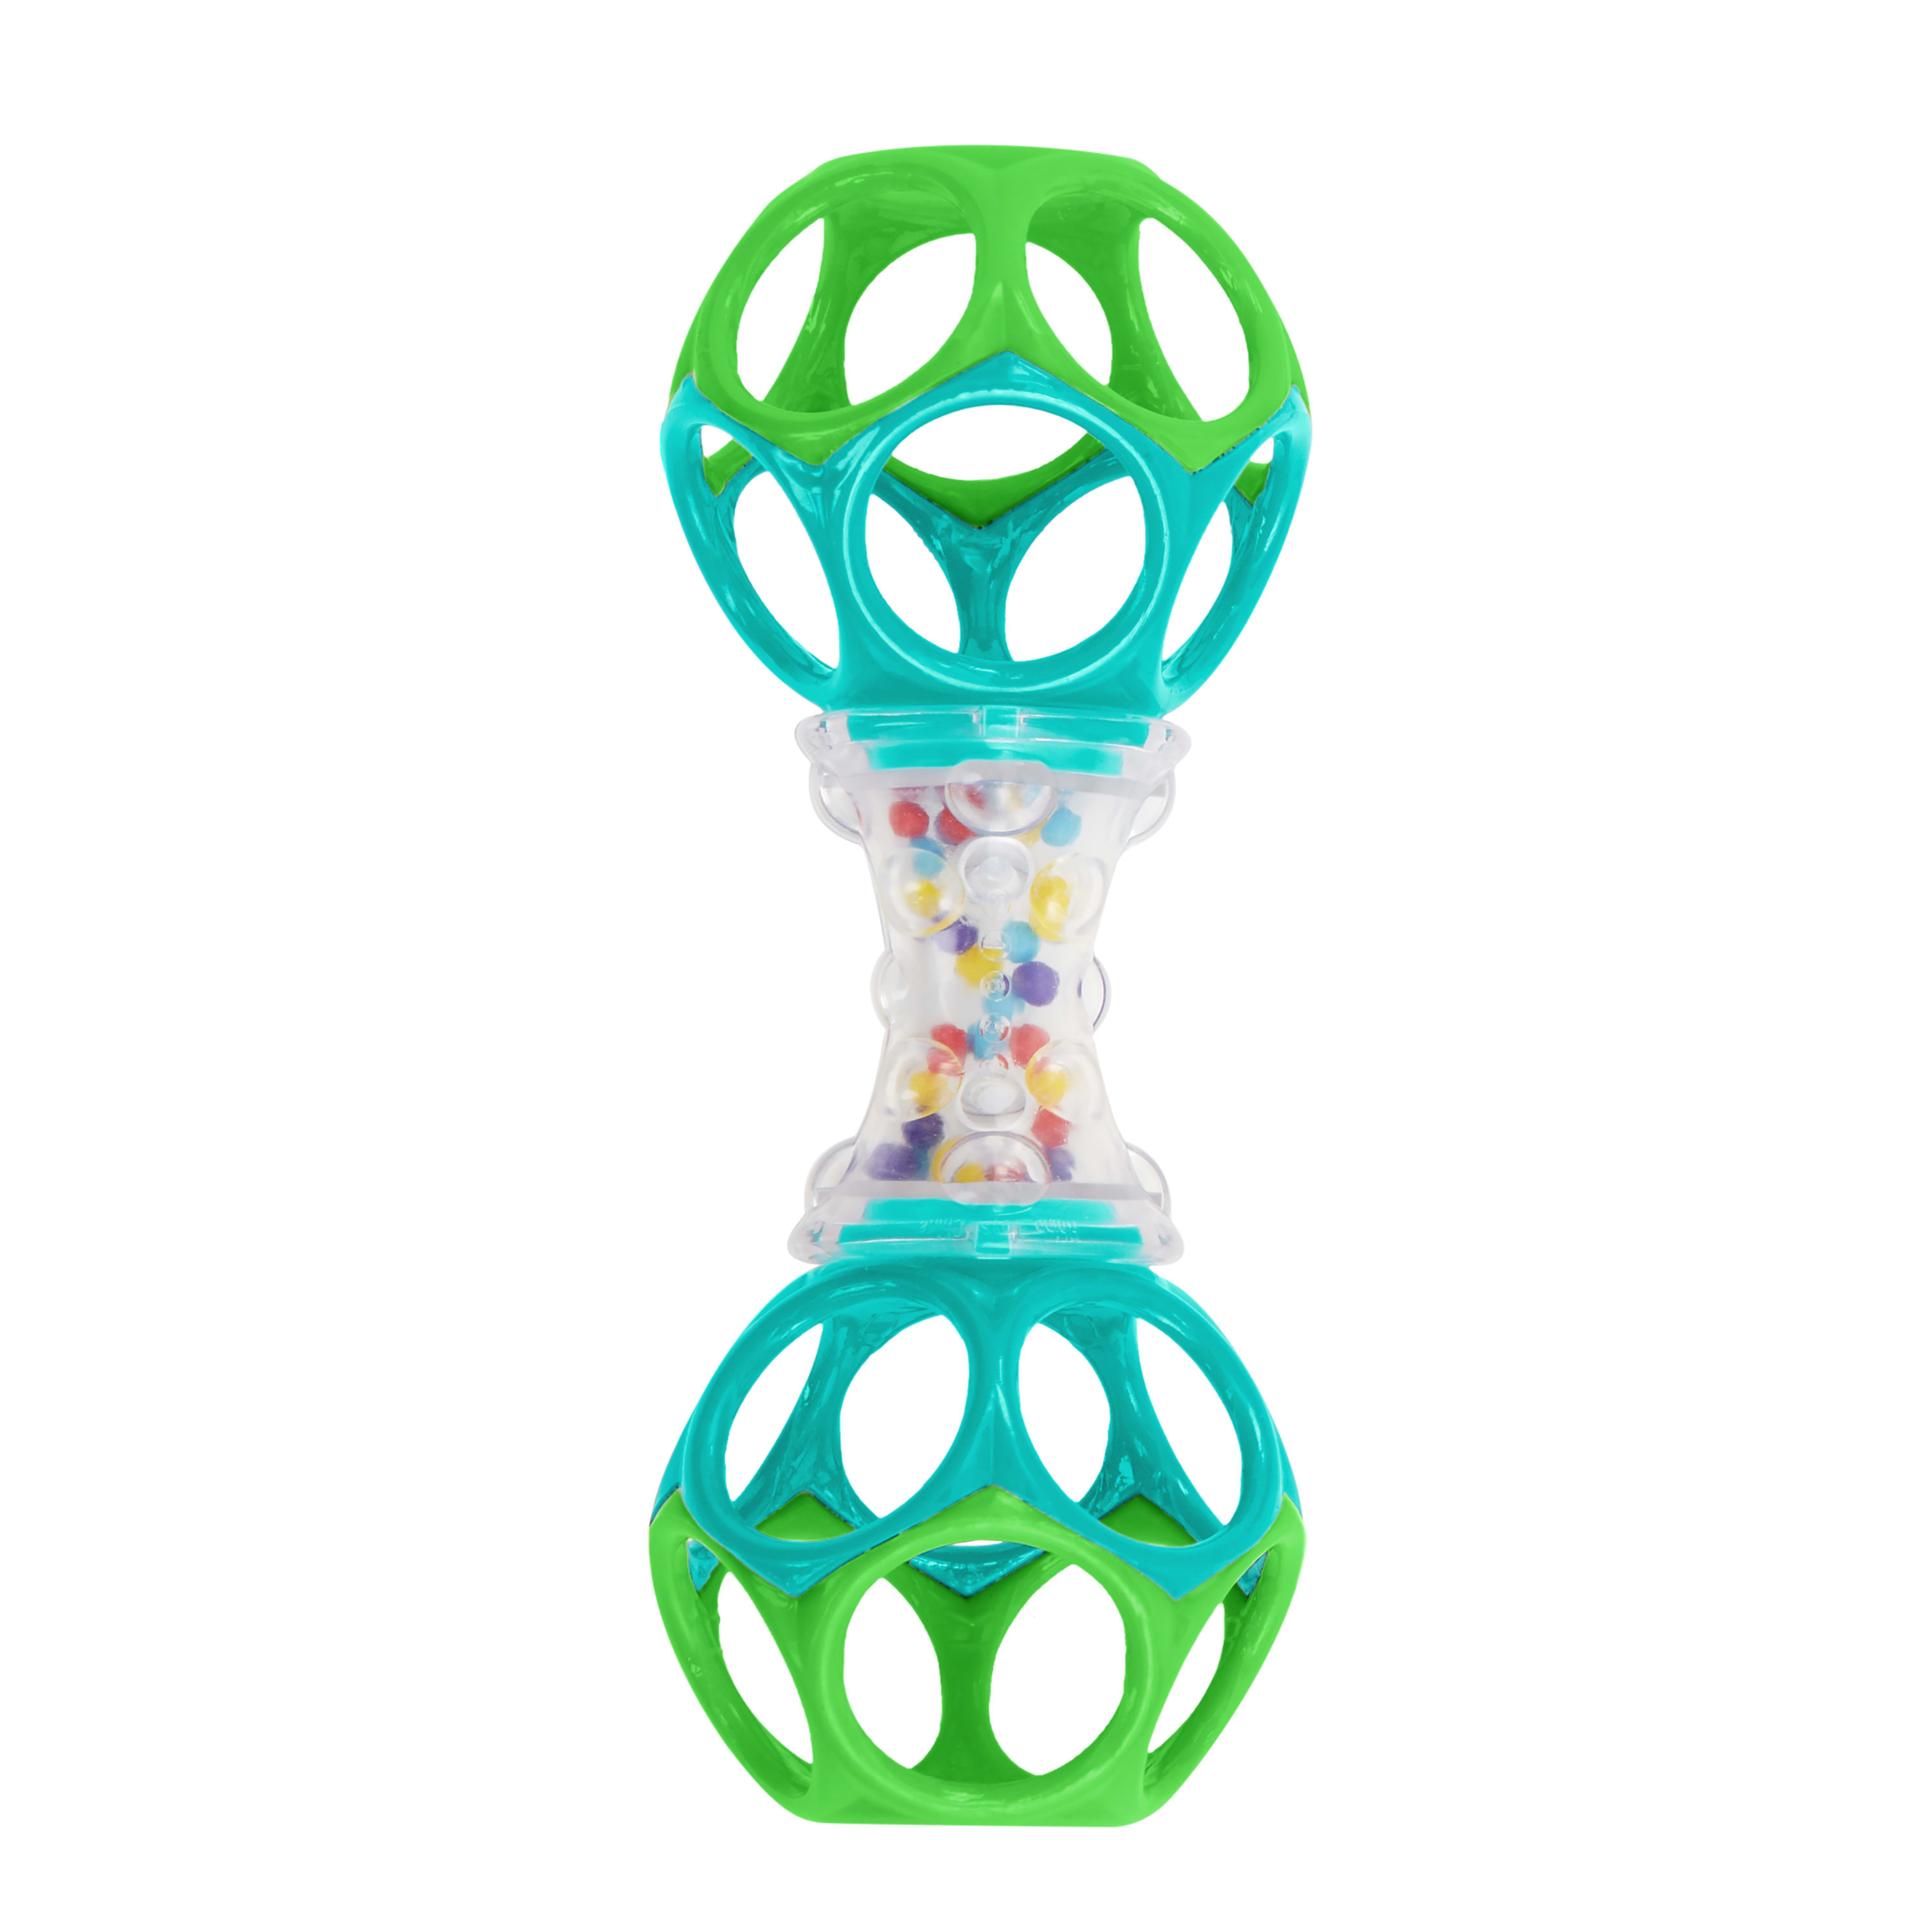 Bright Starts Oball Shaker Beats Easy Grasp Infant Baby Rattle, Blue and Green - image 1 of 4